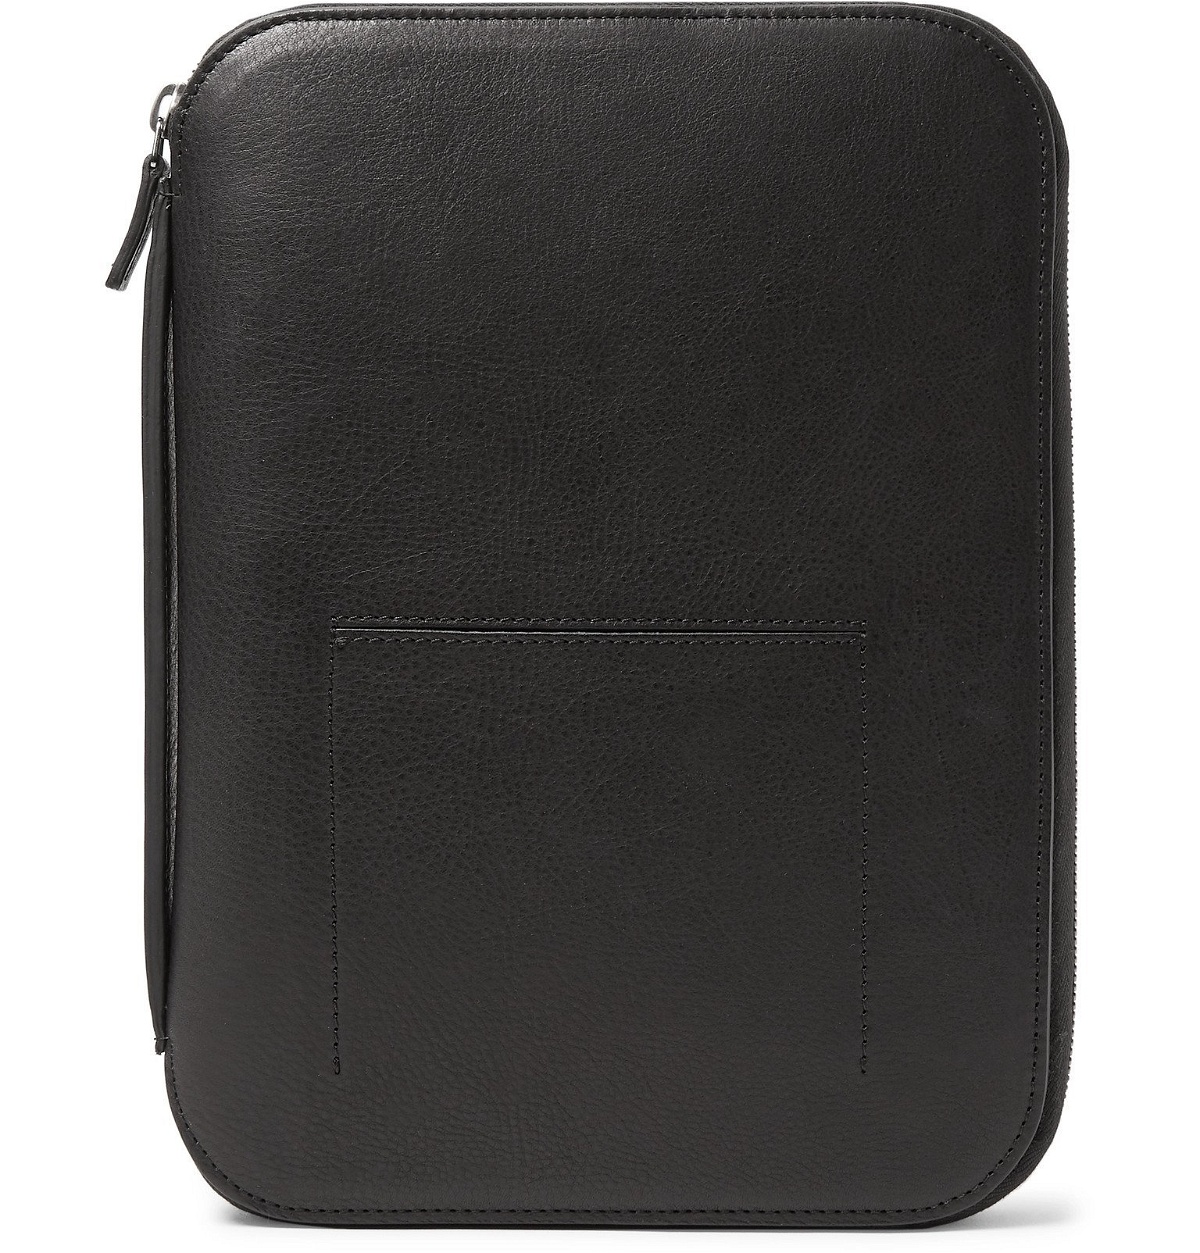 Photo: This Is Ground - Mod Tablet 5 Leather Pouch - Black